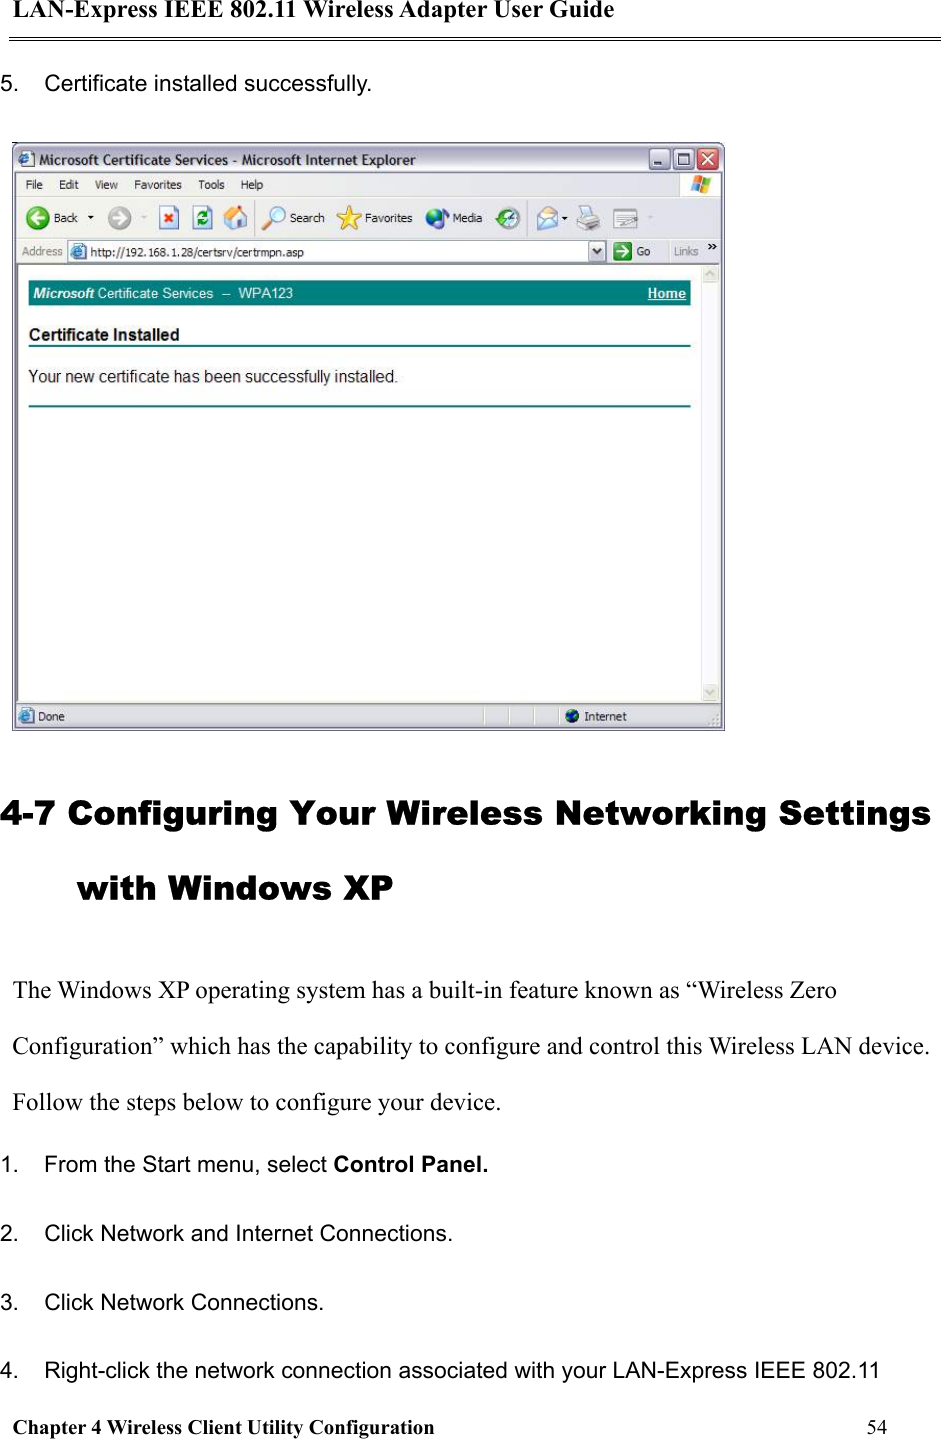 LAN-Express IEEE 802.11 Wireless Adapter User Guide Chapter 4 Wireless Client Utility Configuration   54  5.  Certificate installed successfully.   4-7 Configuring Your Wireless Networking Settings with Windows XP The Windows XP operating system has a built-in feature known as “Wireless Zero Configuration” which has the capability to configure and control this Wireless LAN device. Follow the steps below to configure your device. 1.  From the Start menu, select Control Panel. 2.  Click Network and Internet Connections. 3.  Click Network Connections. 4.  Right-click the network connection associated with your LAN-Express IEEE 802.11 